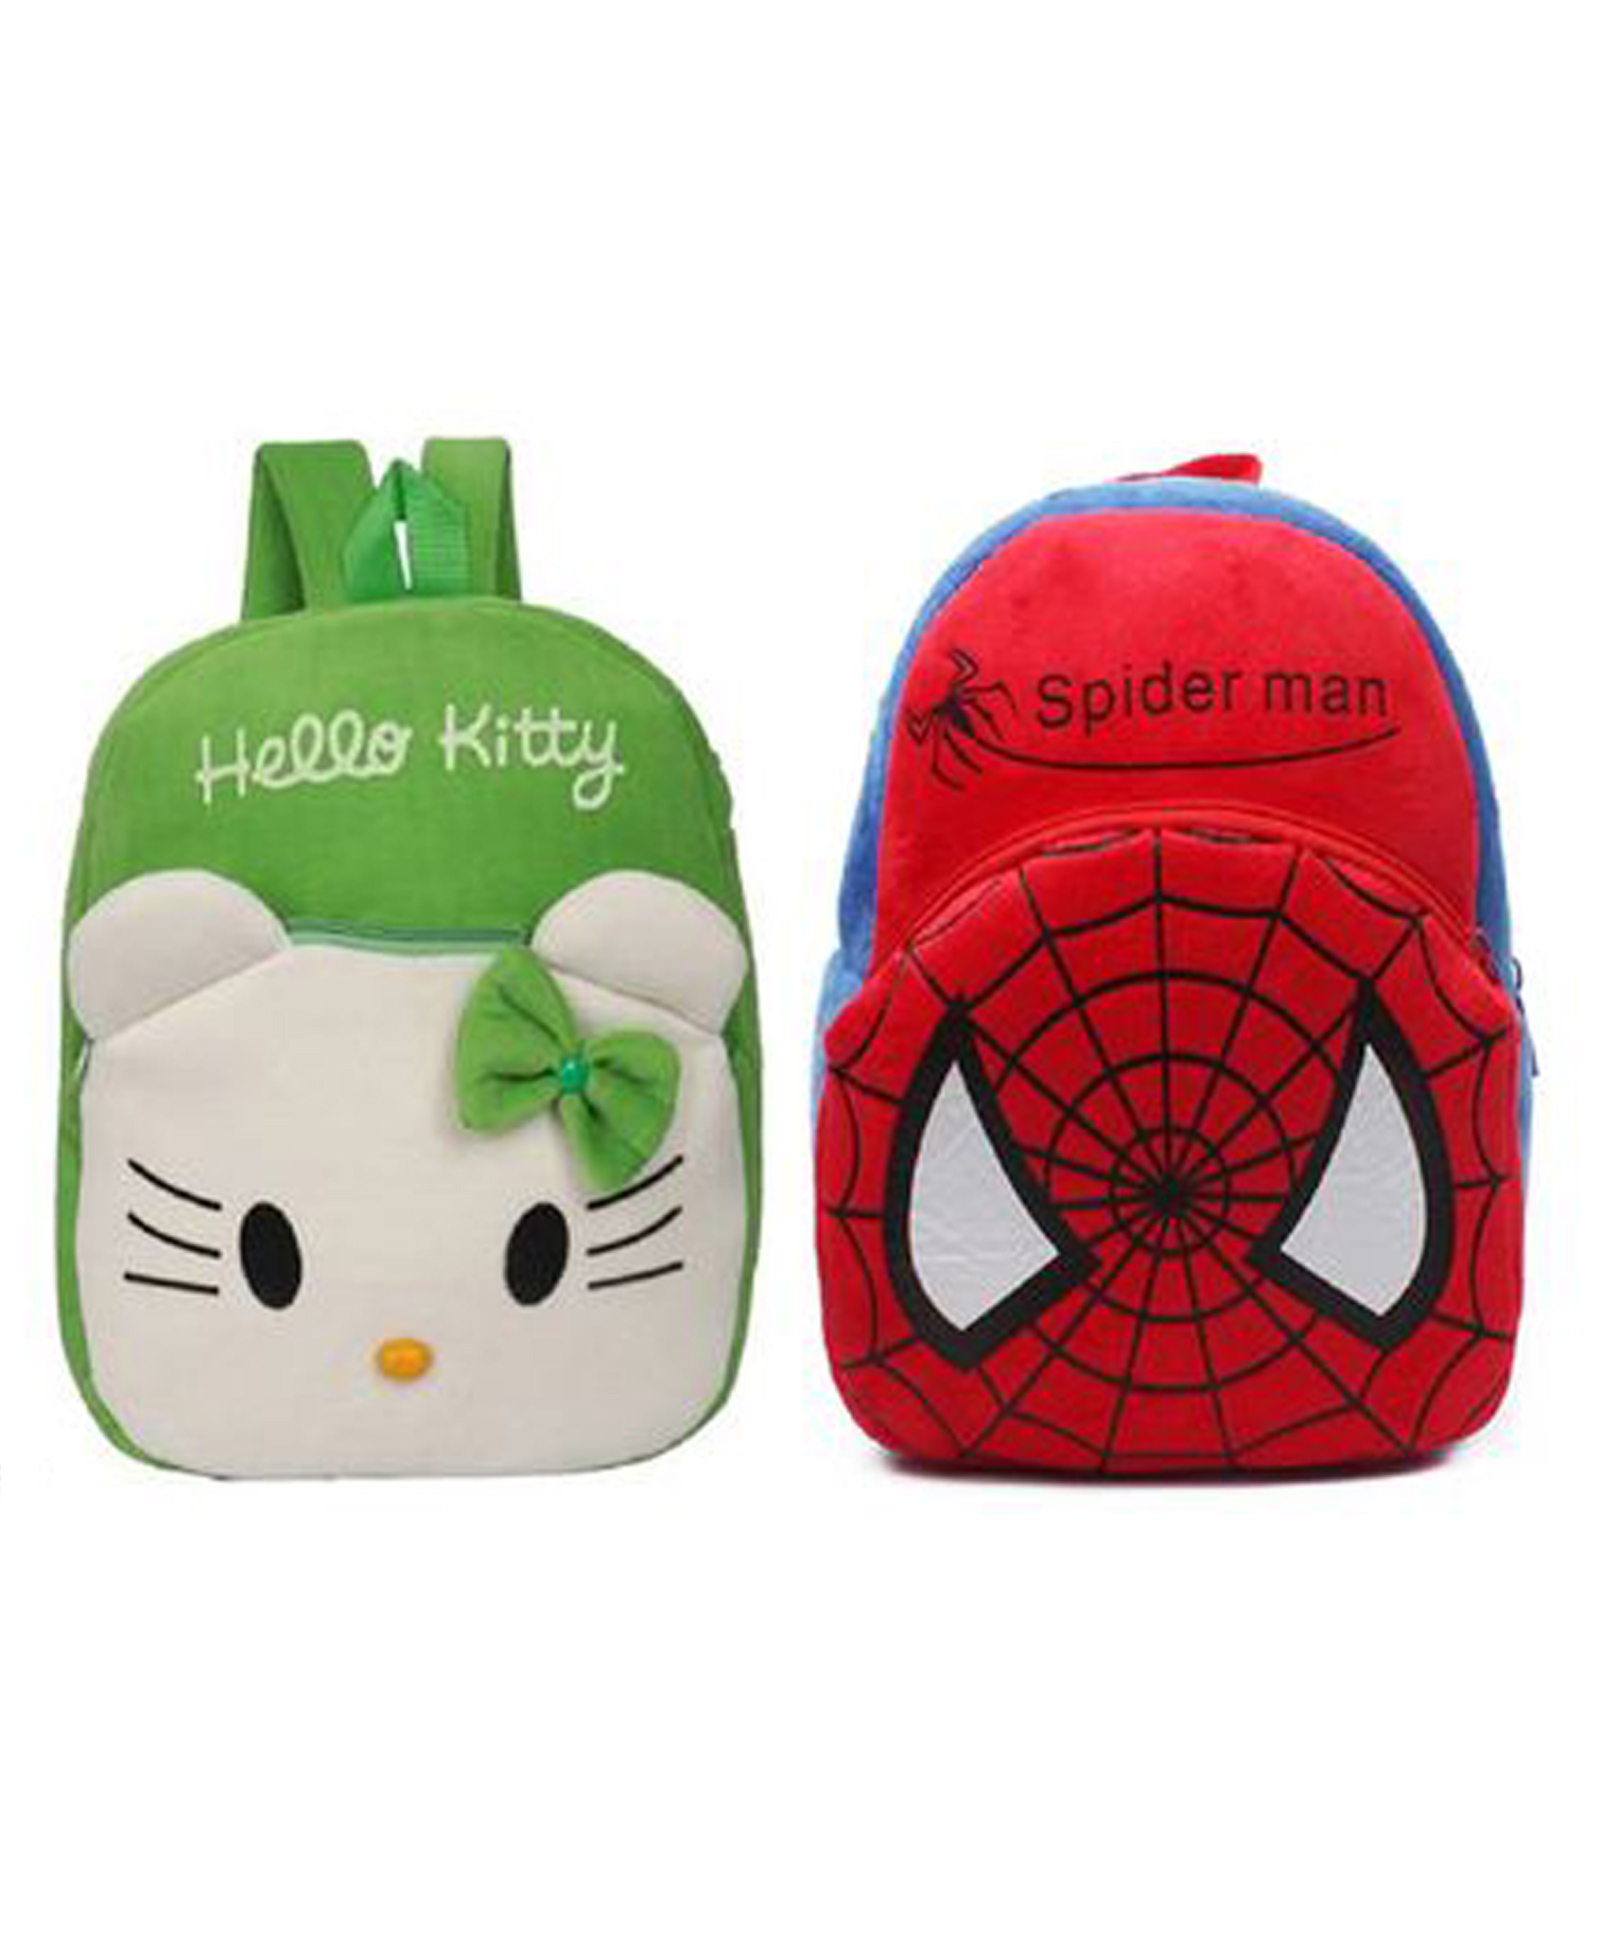 PROERA Hello Kitty & Spiderman Kids School Bag Soft Plush Green Red Pack of  2 - Height 12 Inches Online in India, Buy at Best Price from  -  10709048